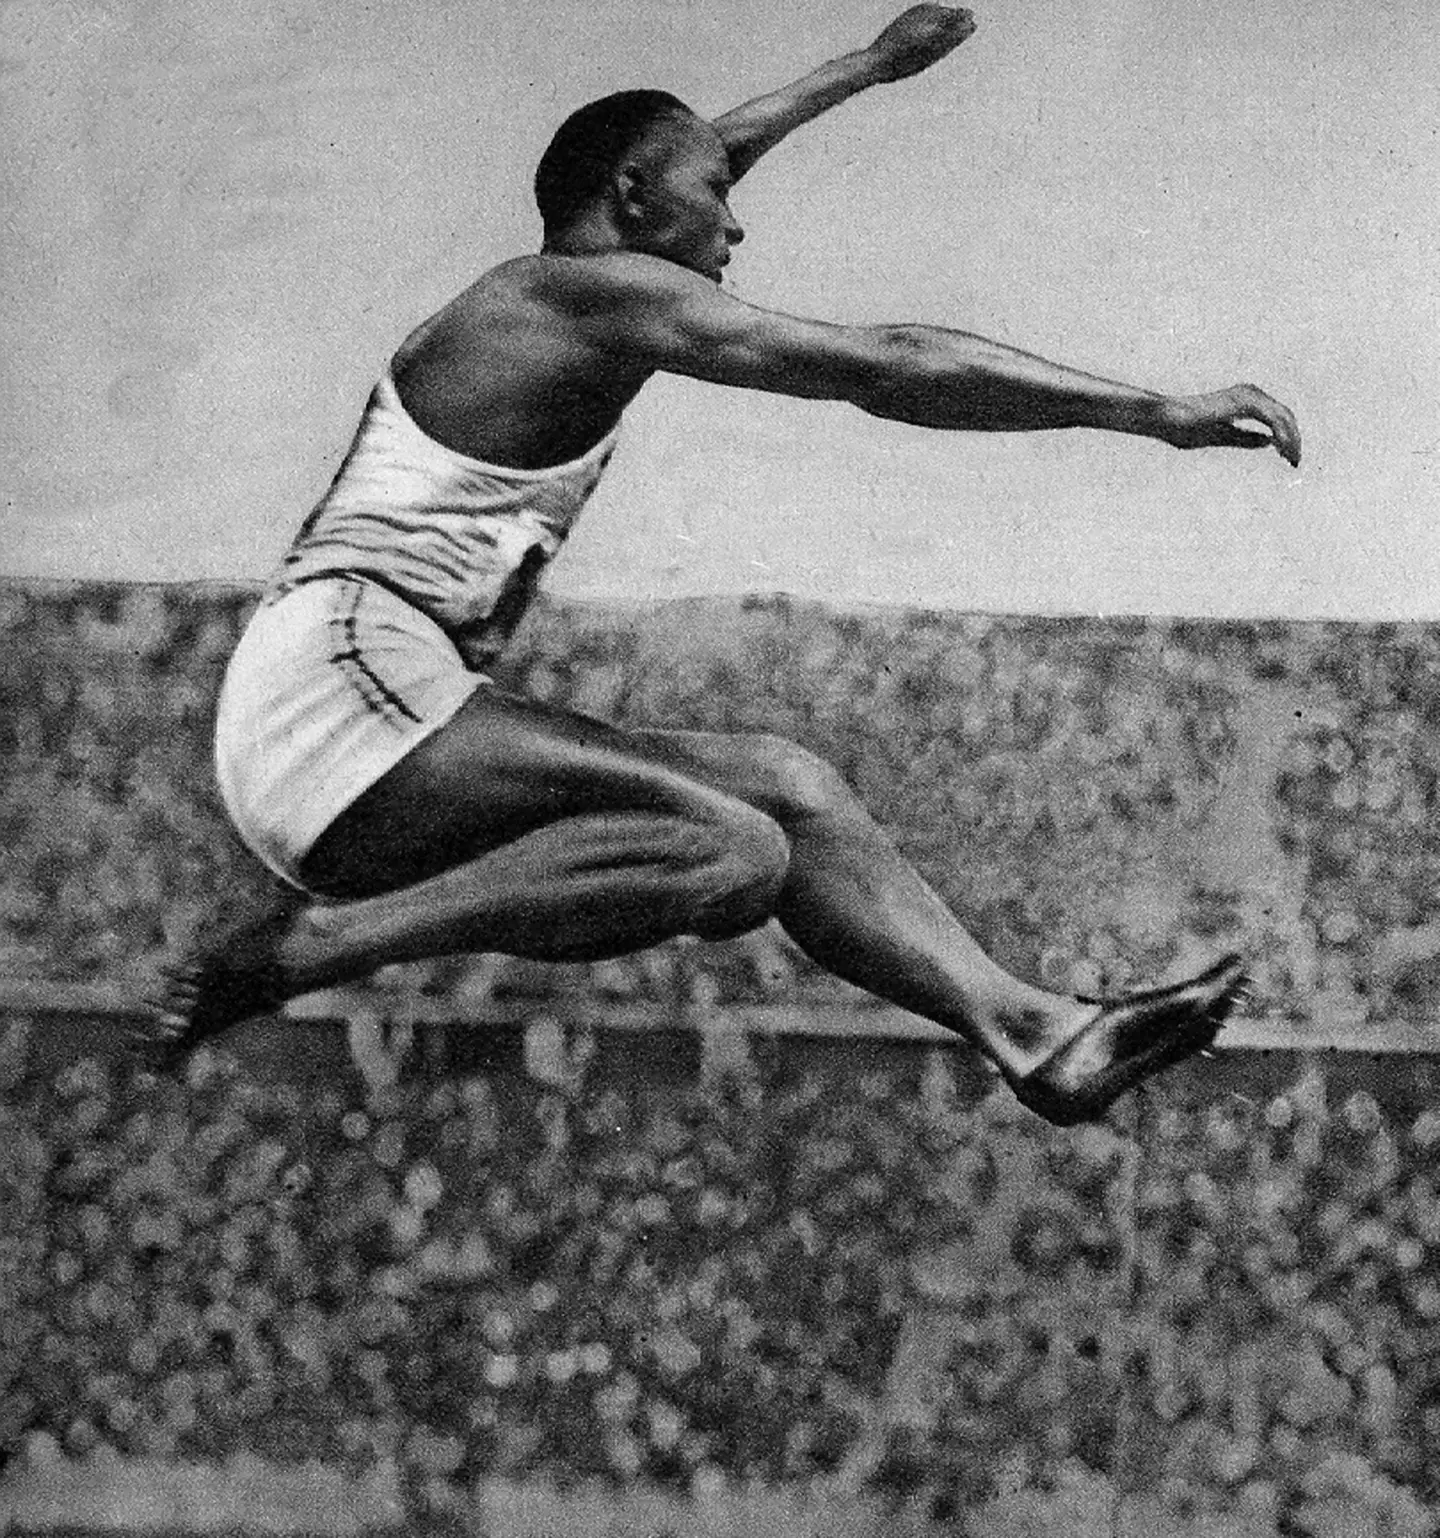 Jesse Owens competed at the 1936 Olympic Games with shoes given to him by Adi Dassler.